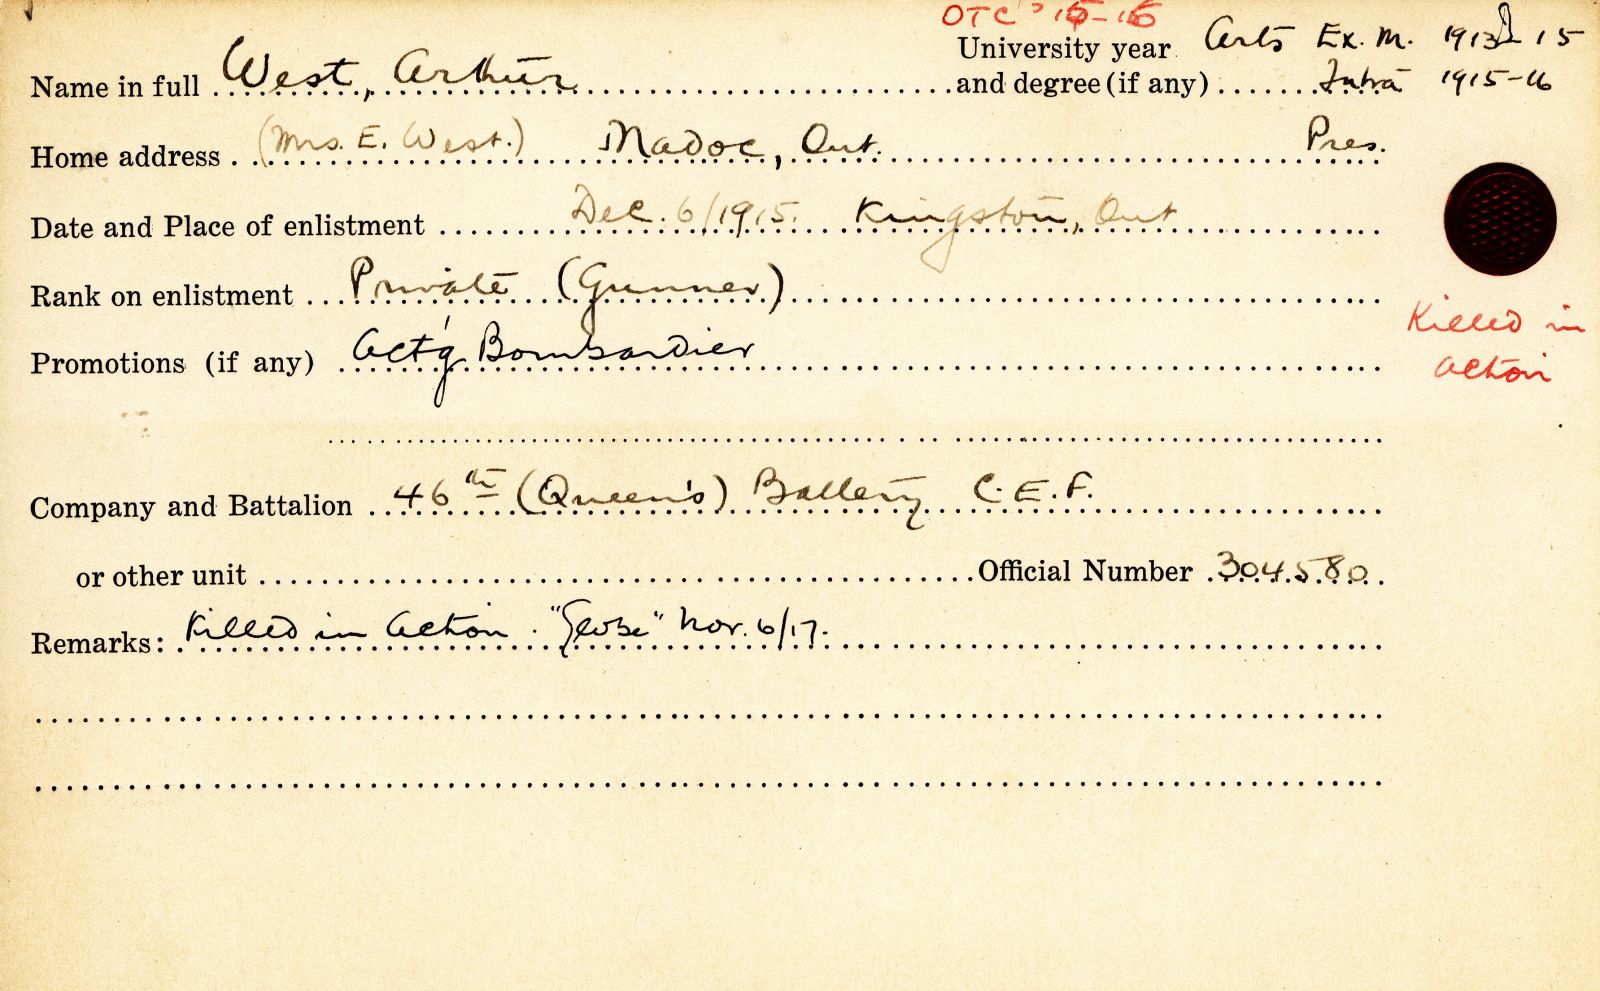 University Military Service Record of West